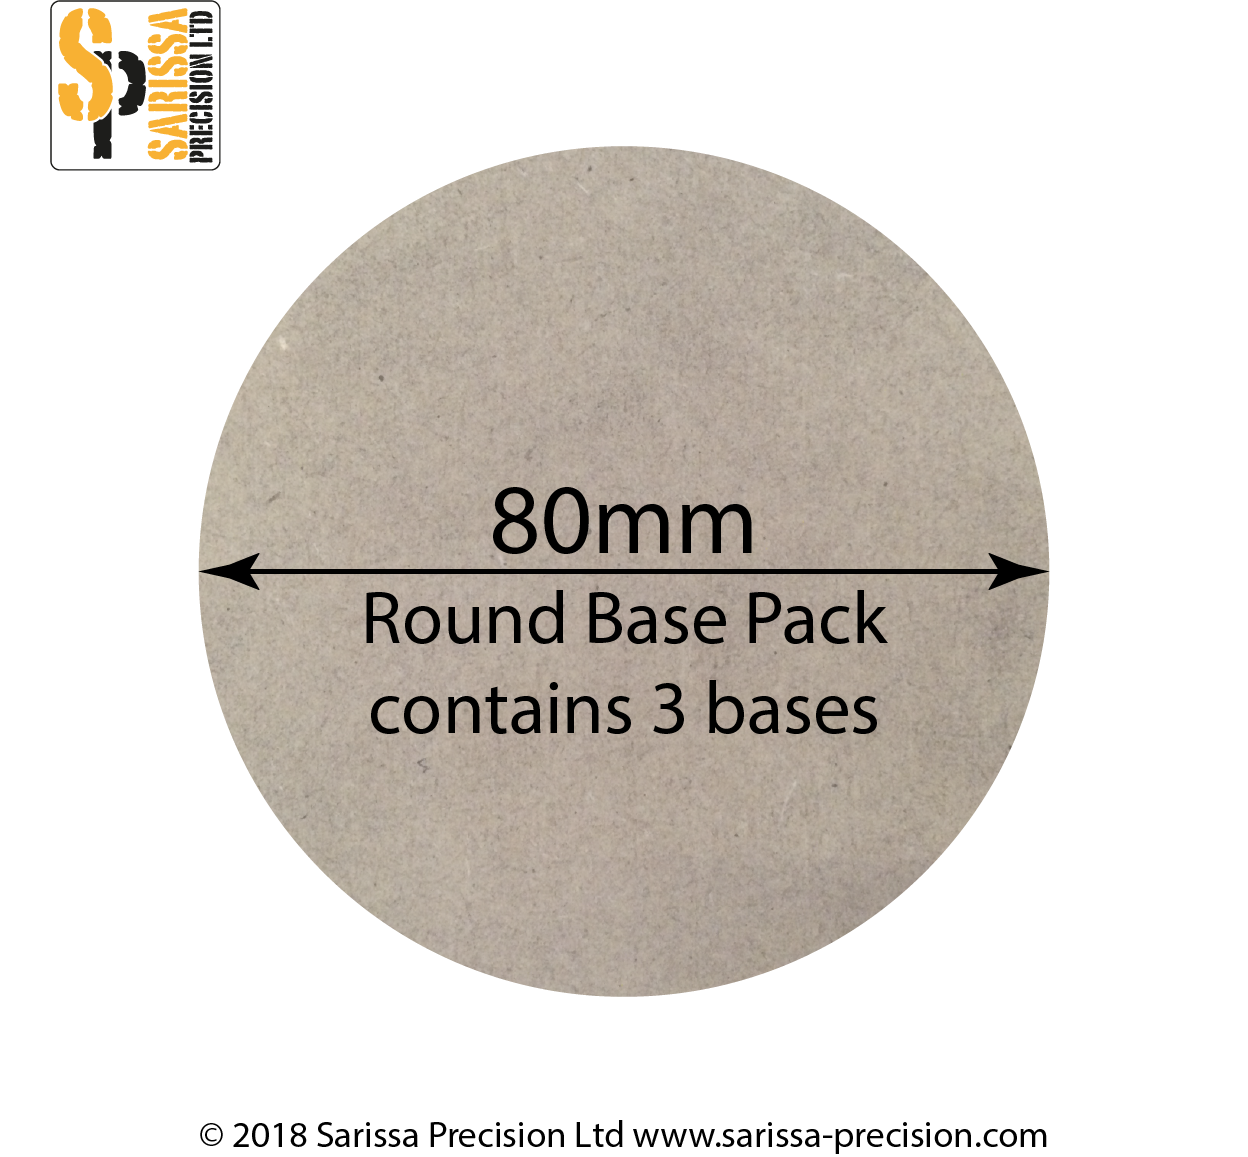 80mm Round Base Pack